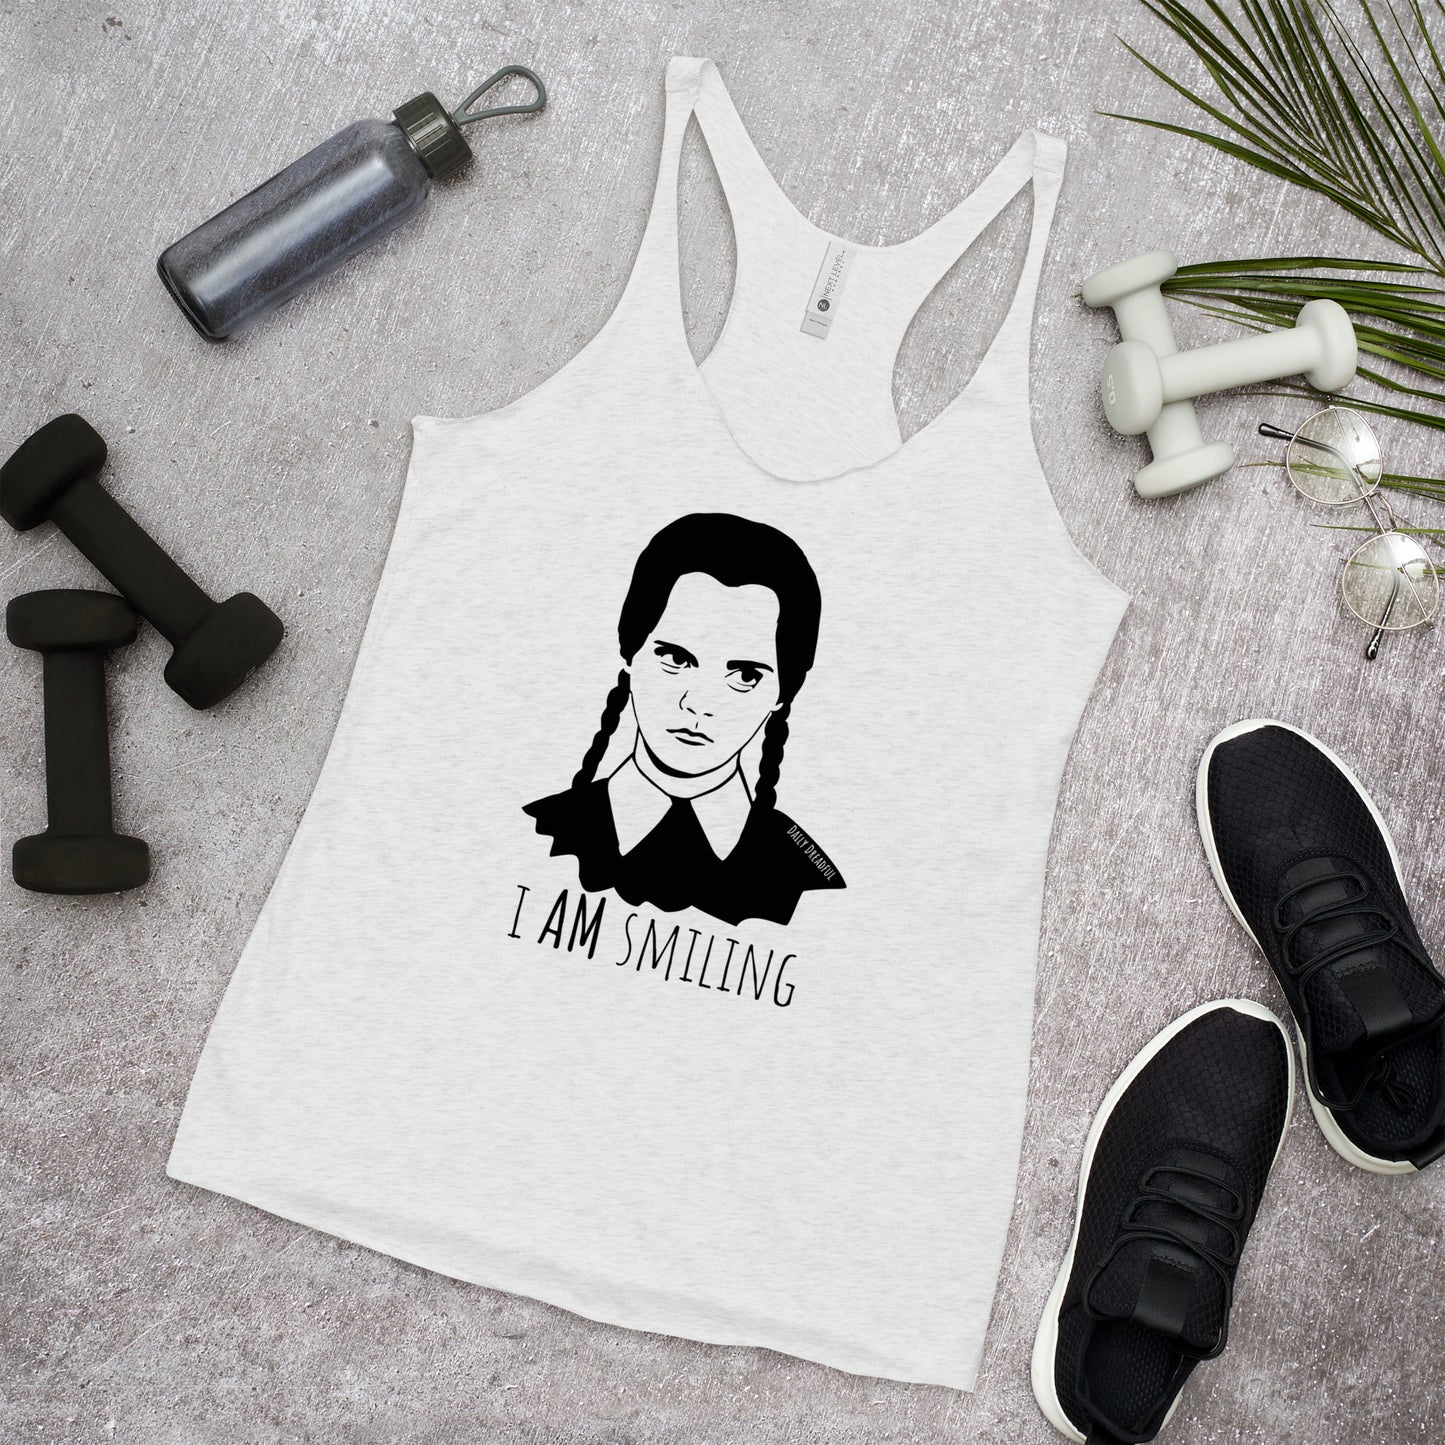 heather white "I Am Smiling" Wednesday Addams Racerback Tank Top from Daily Dreadful